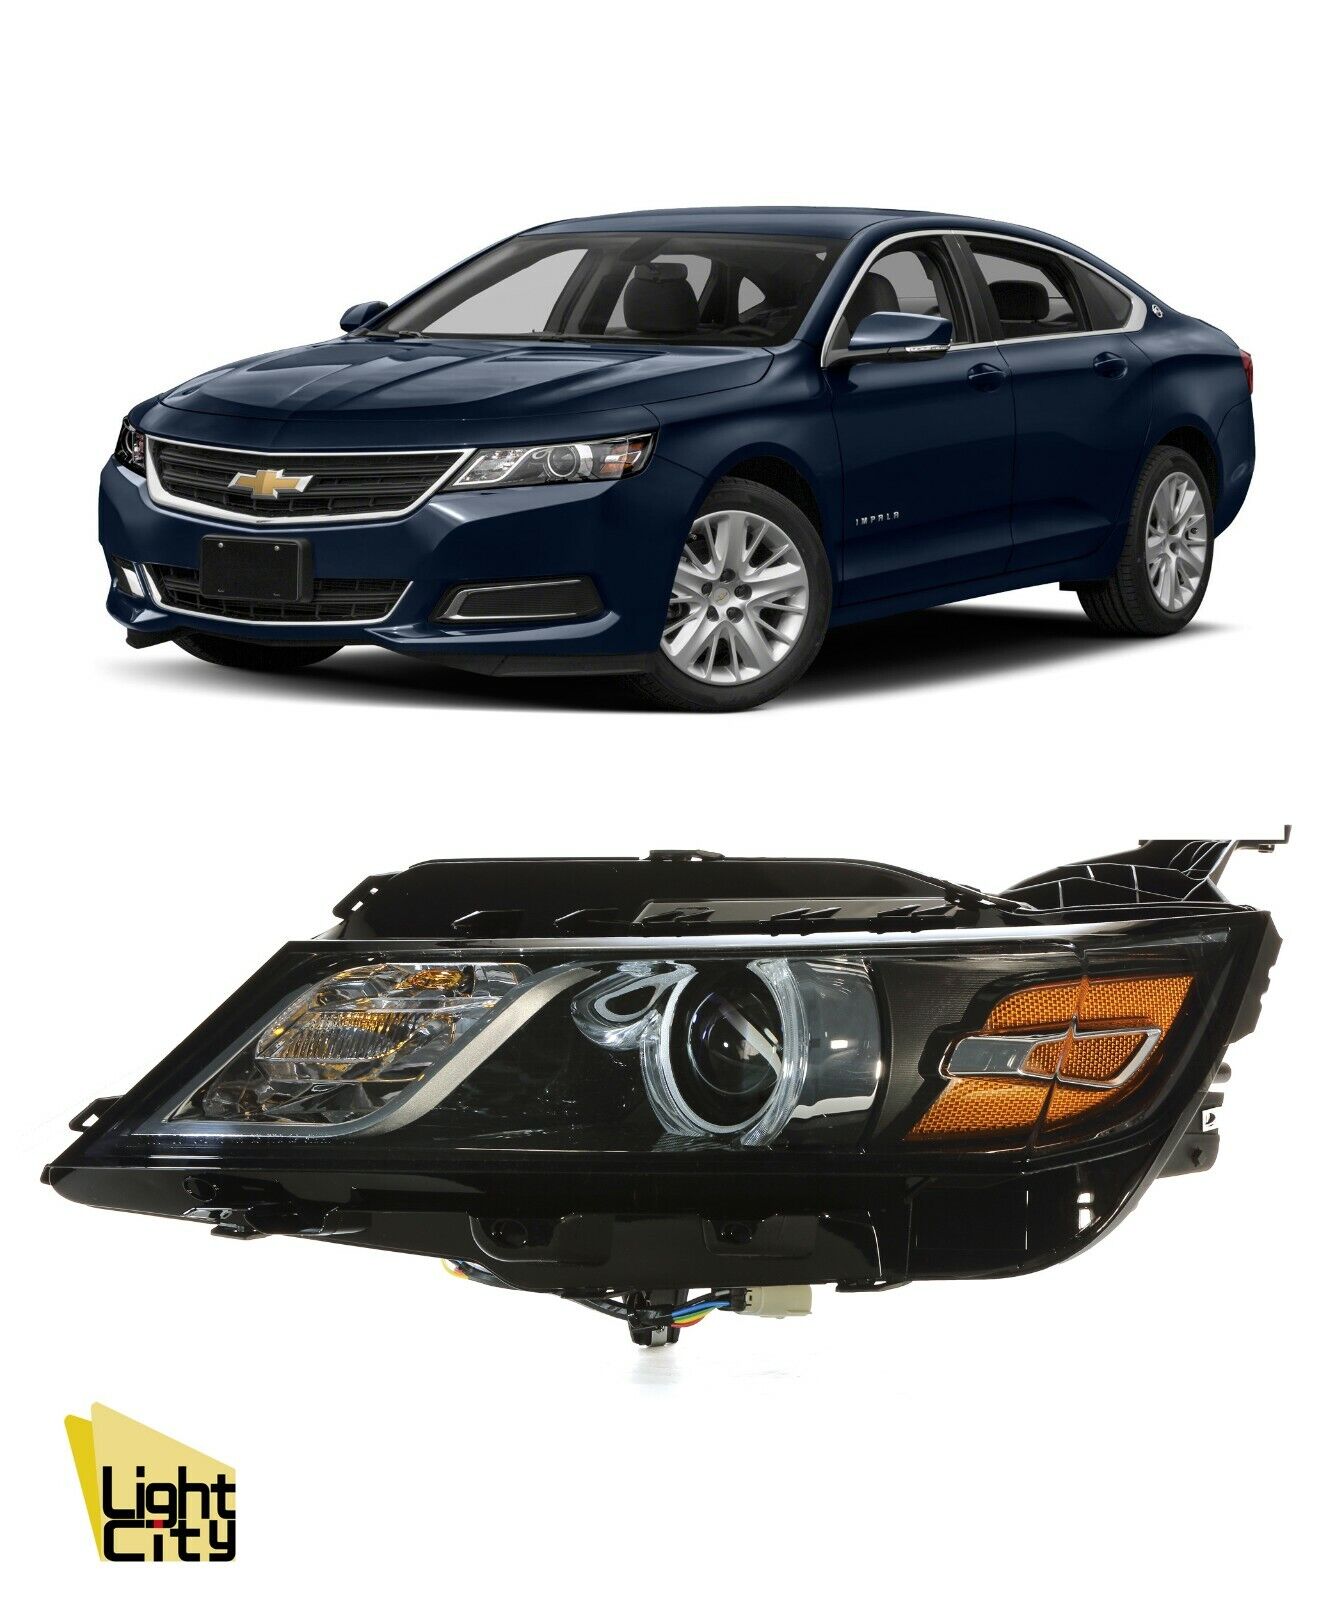 [*FULL HID*] For 2015-2020 Impala Driver Side Headlight with Bulb & Ballast LH